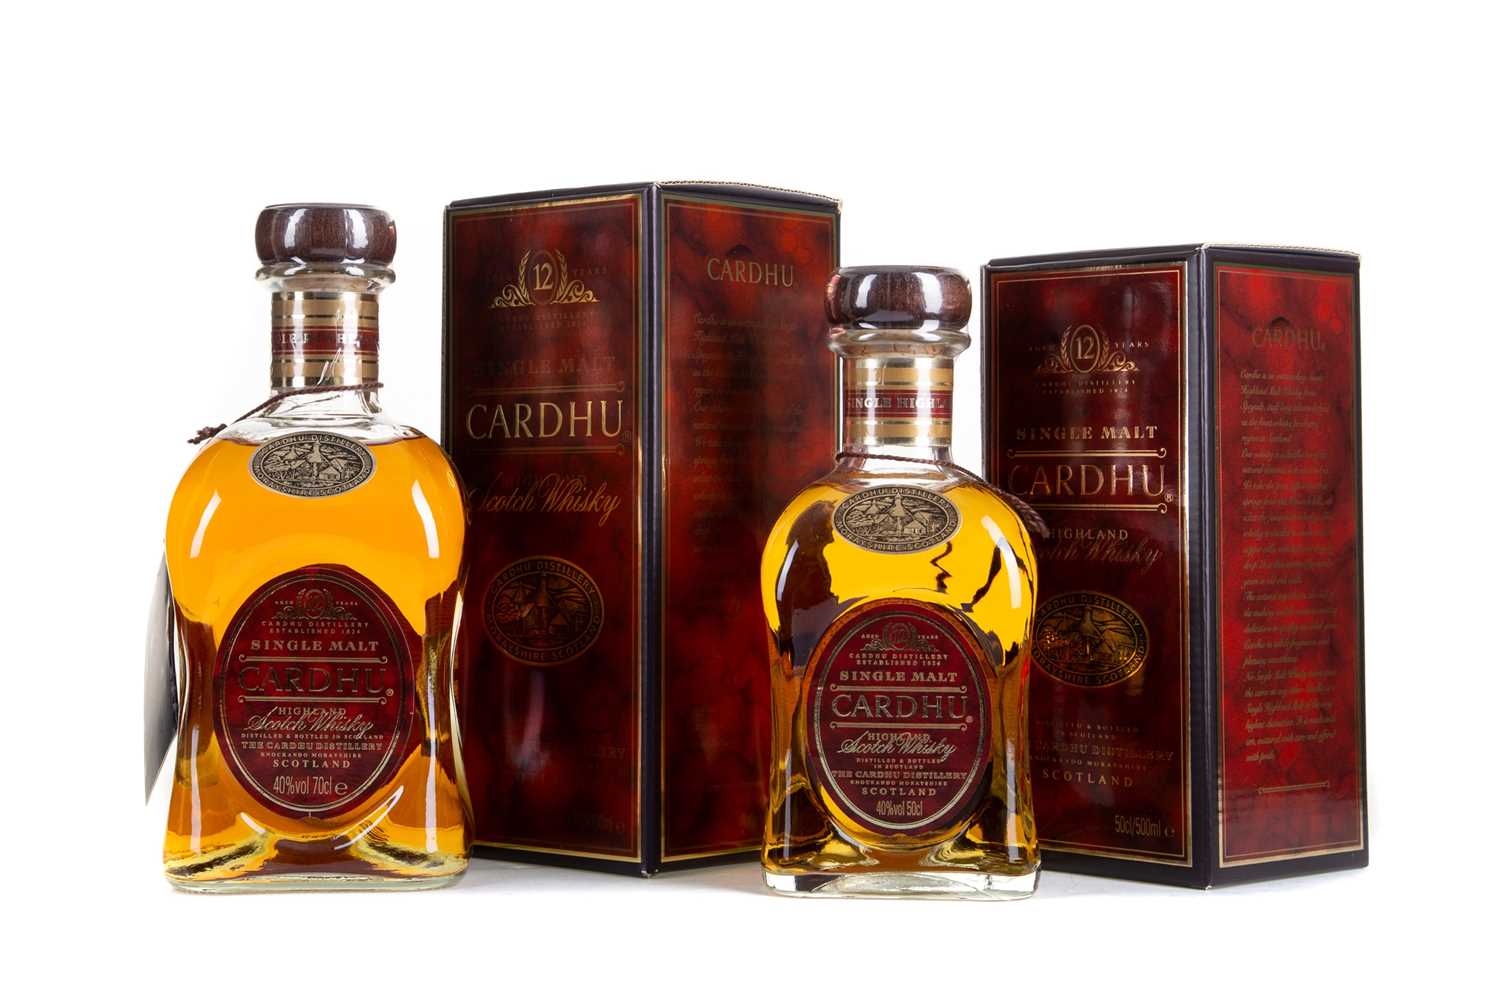 Lot 4 - 2 BOTTLES OF CARDHU 12 YEAR OLD (70CL & 50CL)